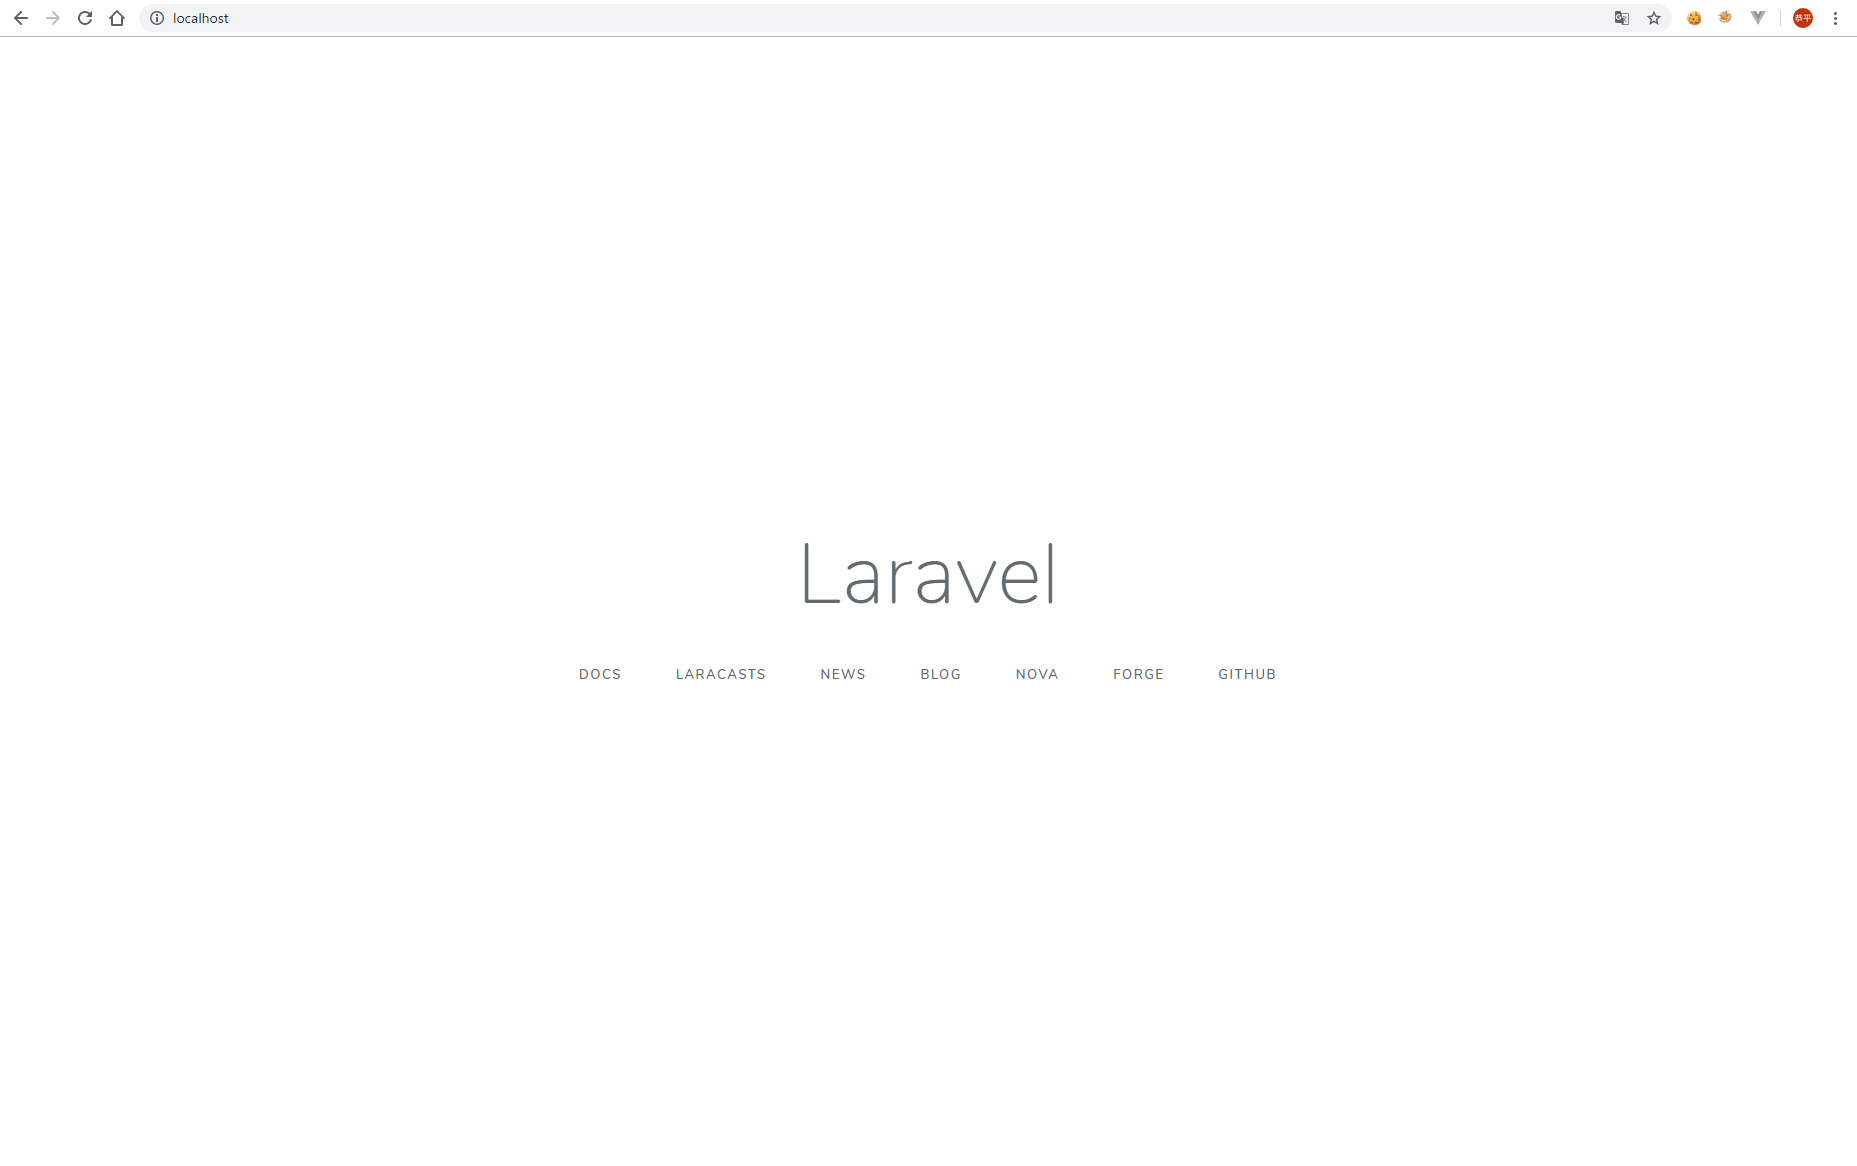 laravel_welcome.PNG